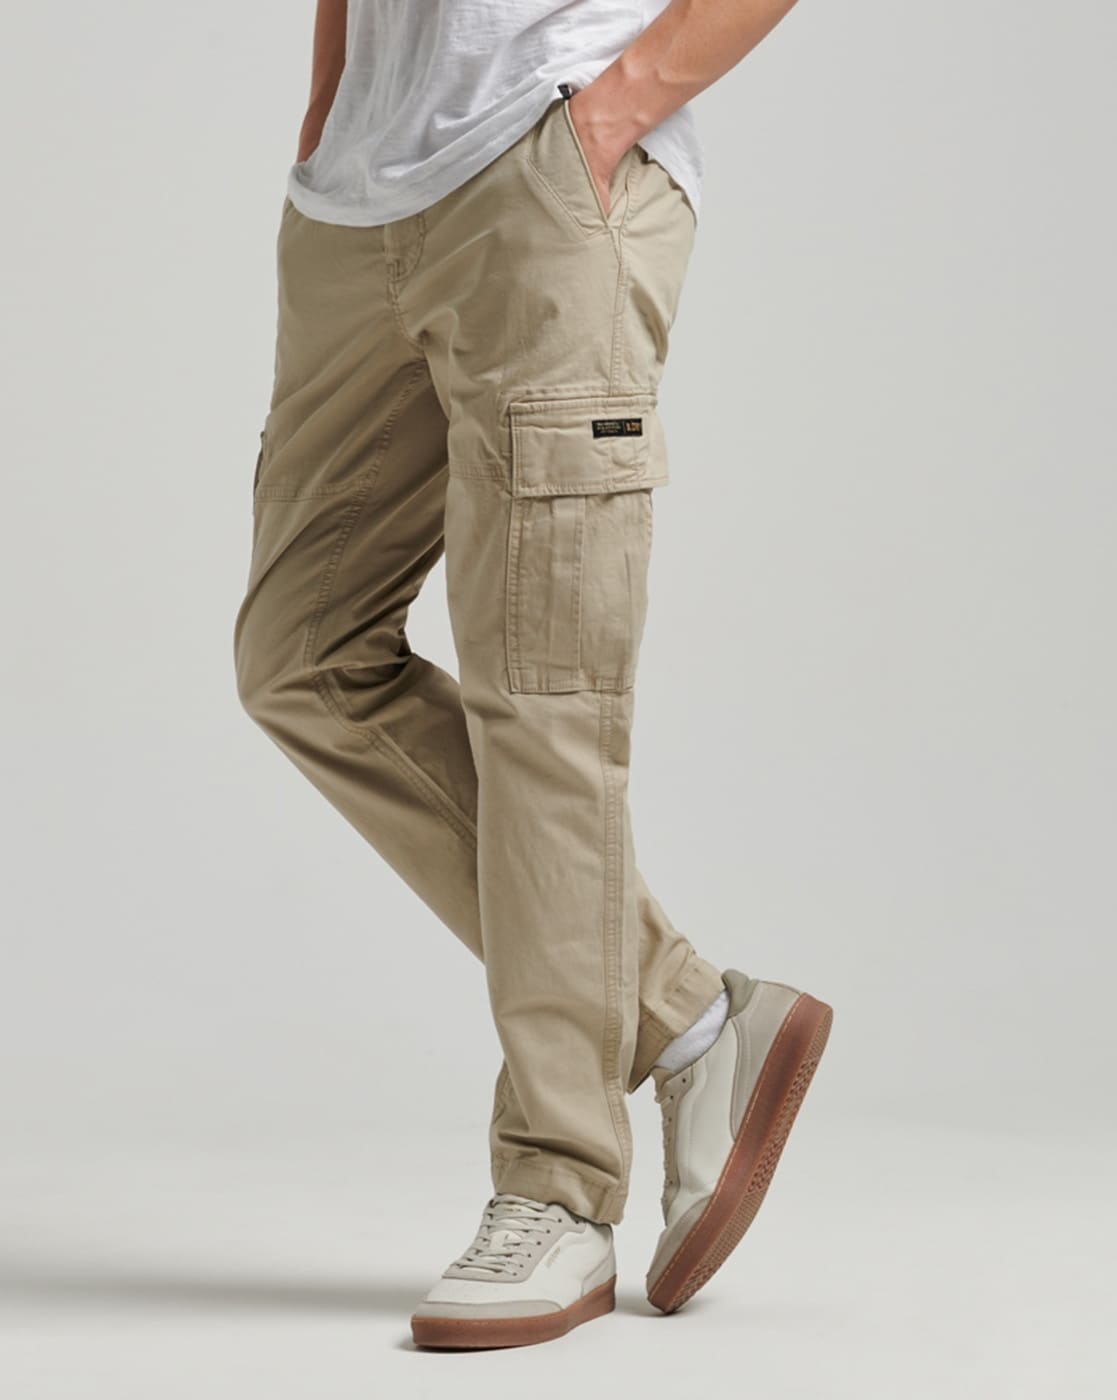 Vintage Safari Style Mens Canvas Khaki Trousers Mens Retro Solid Color  Casual Pants With Loose Straight Leg Fit Style #230504 From Kong003, $39.37  | DHgate.Com